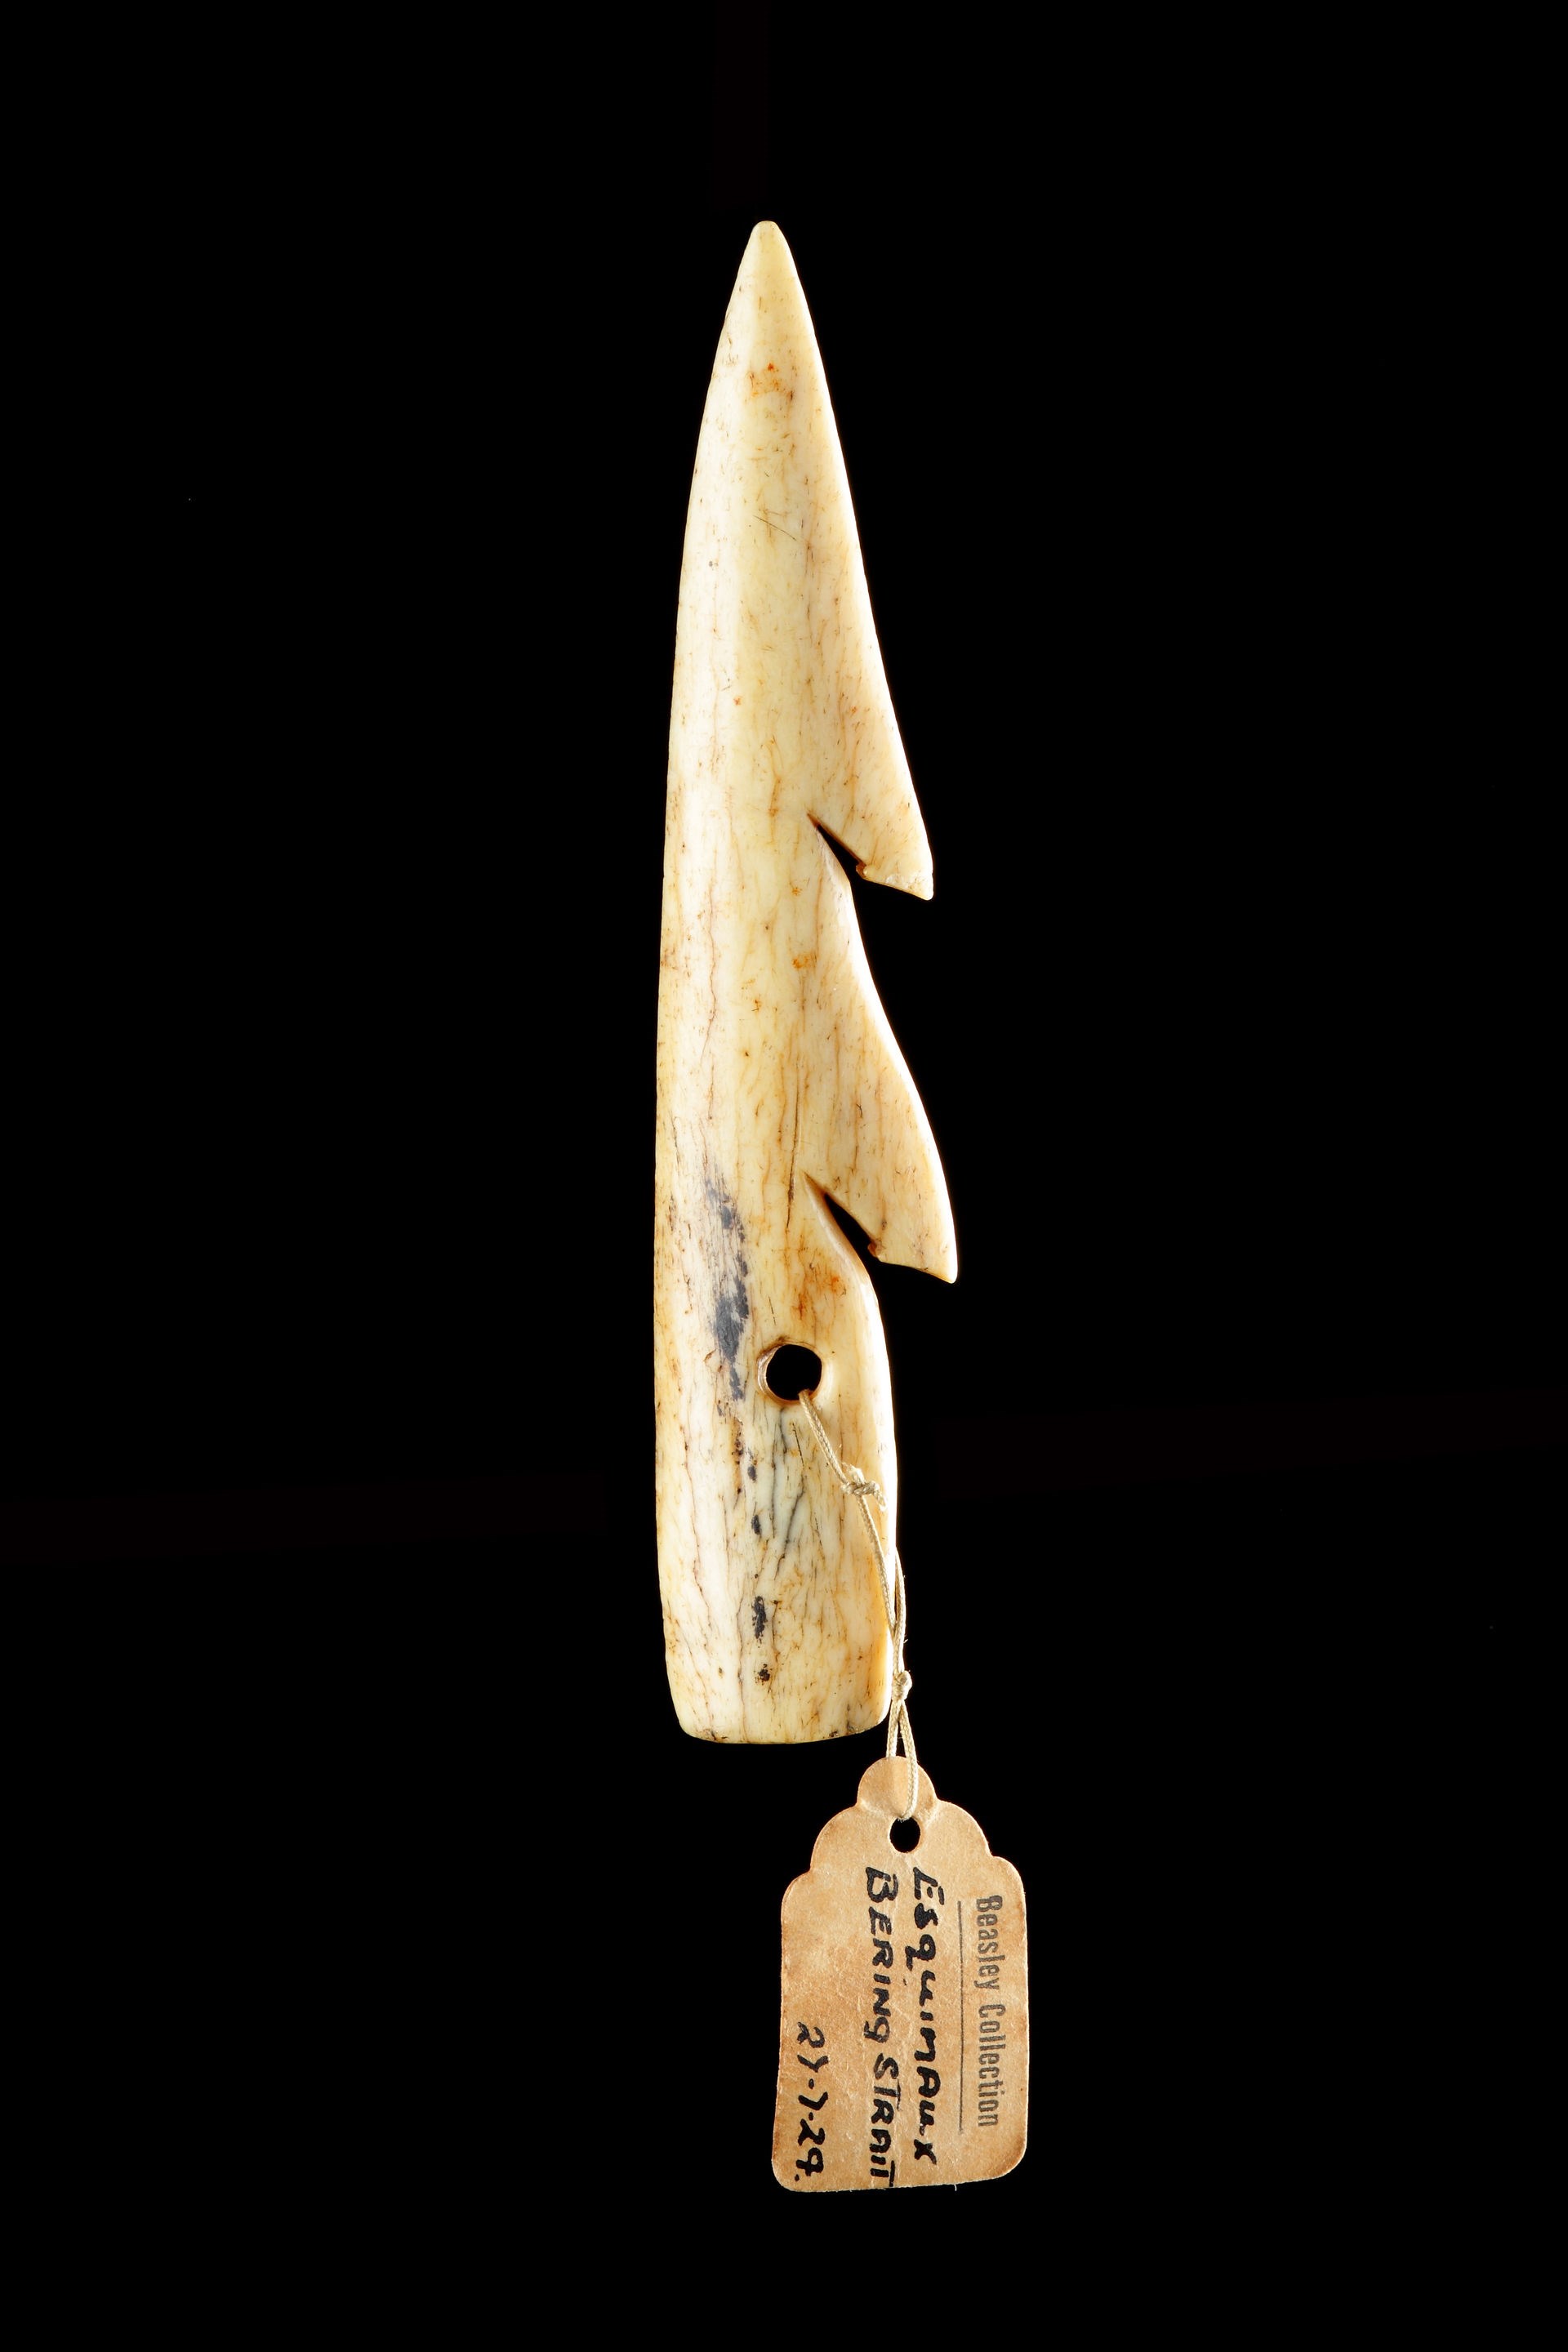 Inuit Eskimo Hunting/Fishing Harpoon Spear sold at auction on 29th July